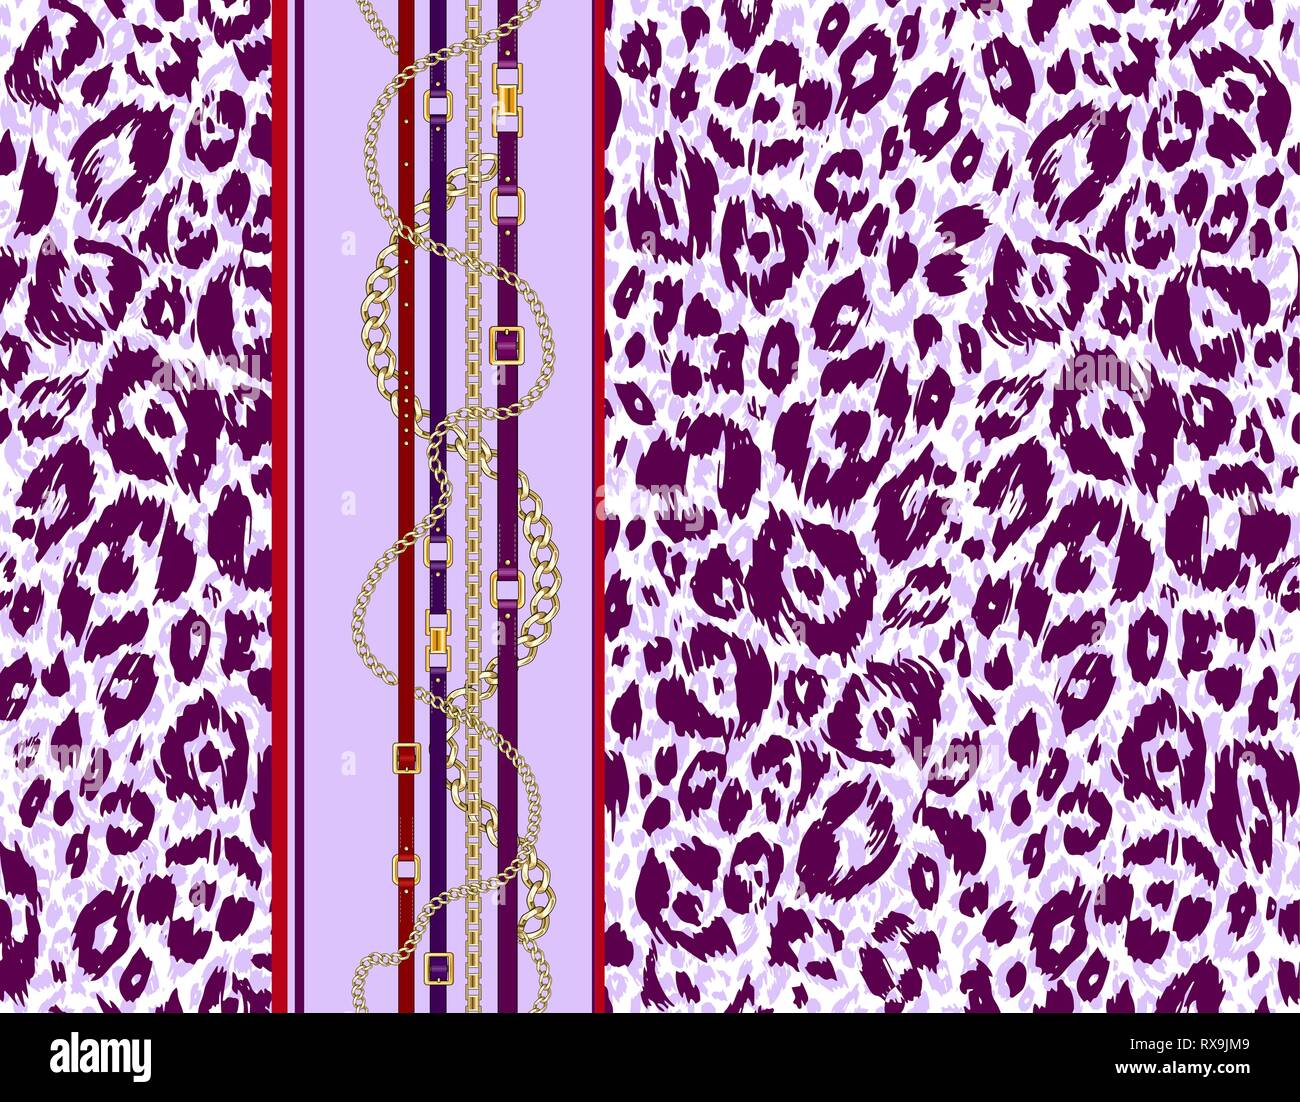 Abctract seamless pattern with belts, chain on bright animal skin ...